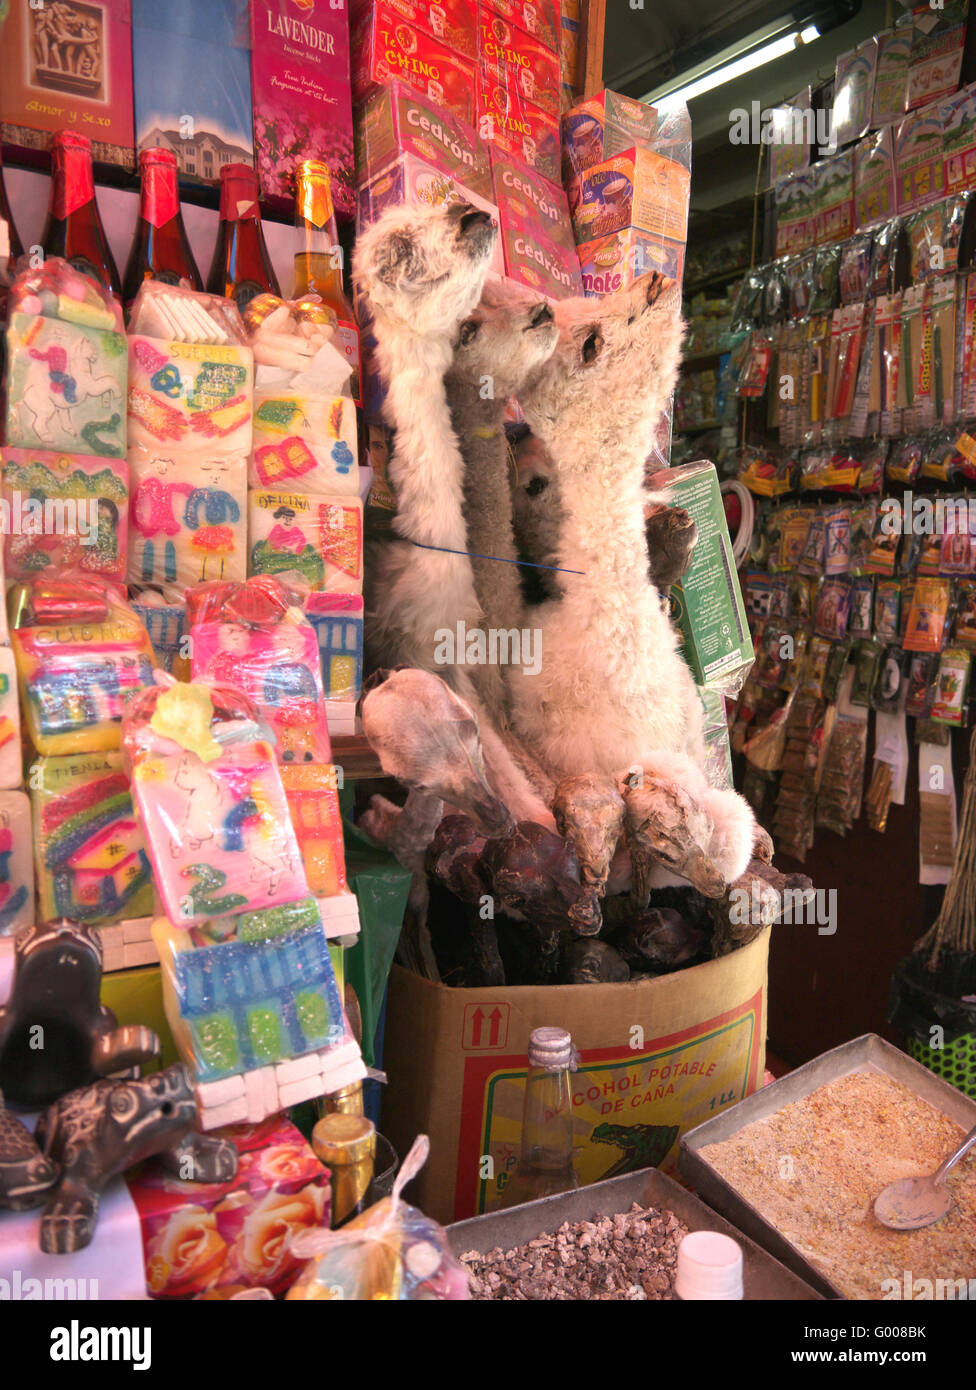 All sorts of items for sale as talisman, amulets, magic, ritual and tradition at Witches Market La Paz Bolivia Stock Photo